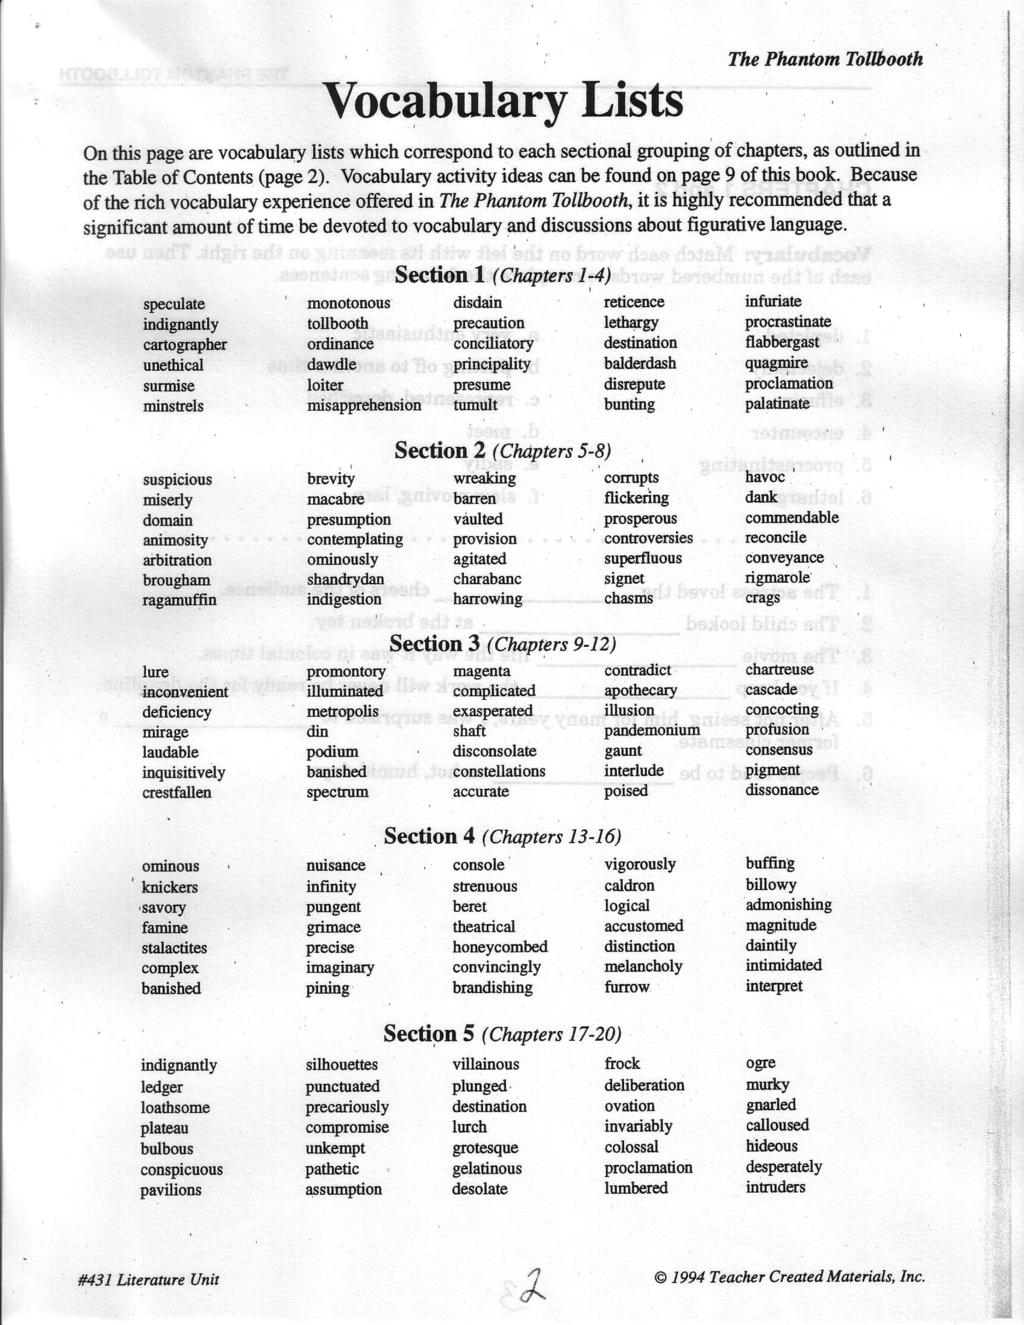 Vocabulary Lists The Phantom Tollbooth On this page are vocabula{y lists which correspond to each sectional grouping of chapters, as outlined in the Table of Contents (page 2).